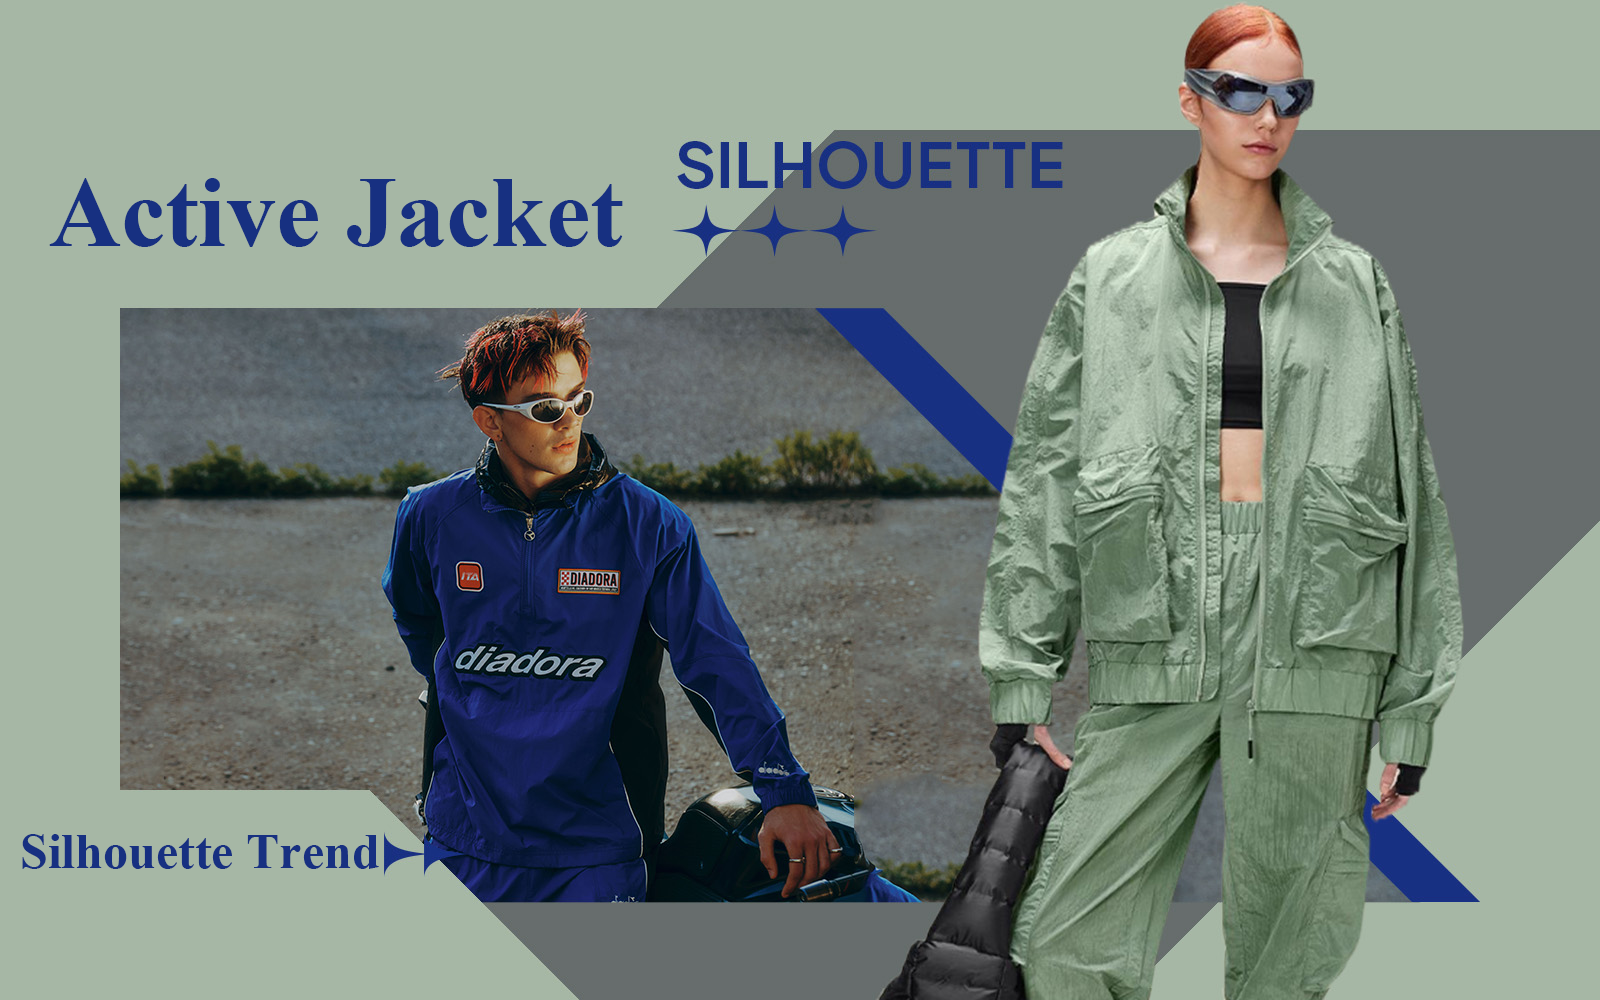 The Silhouette Trend for Active Jacket